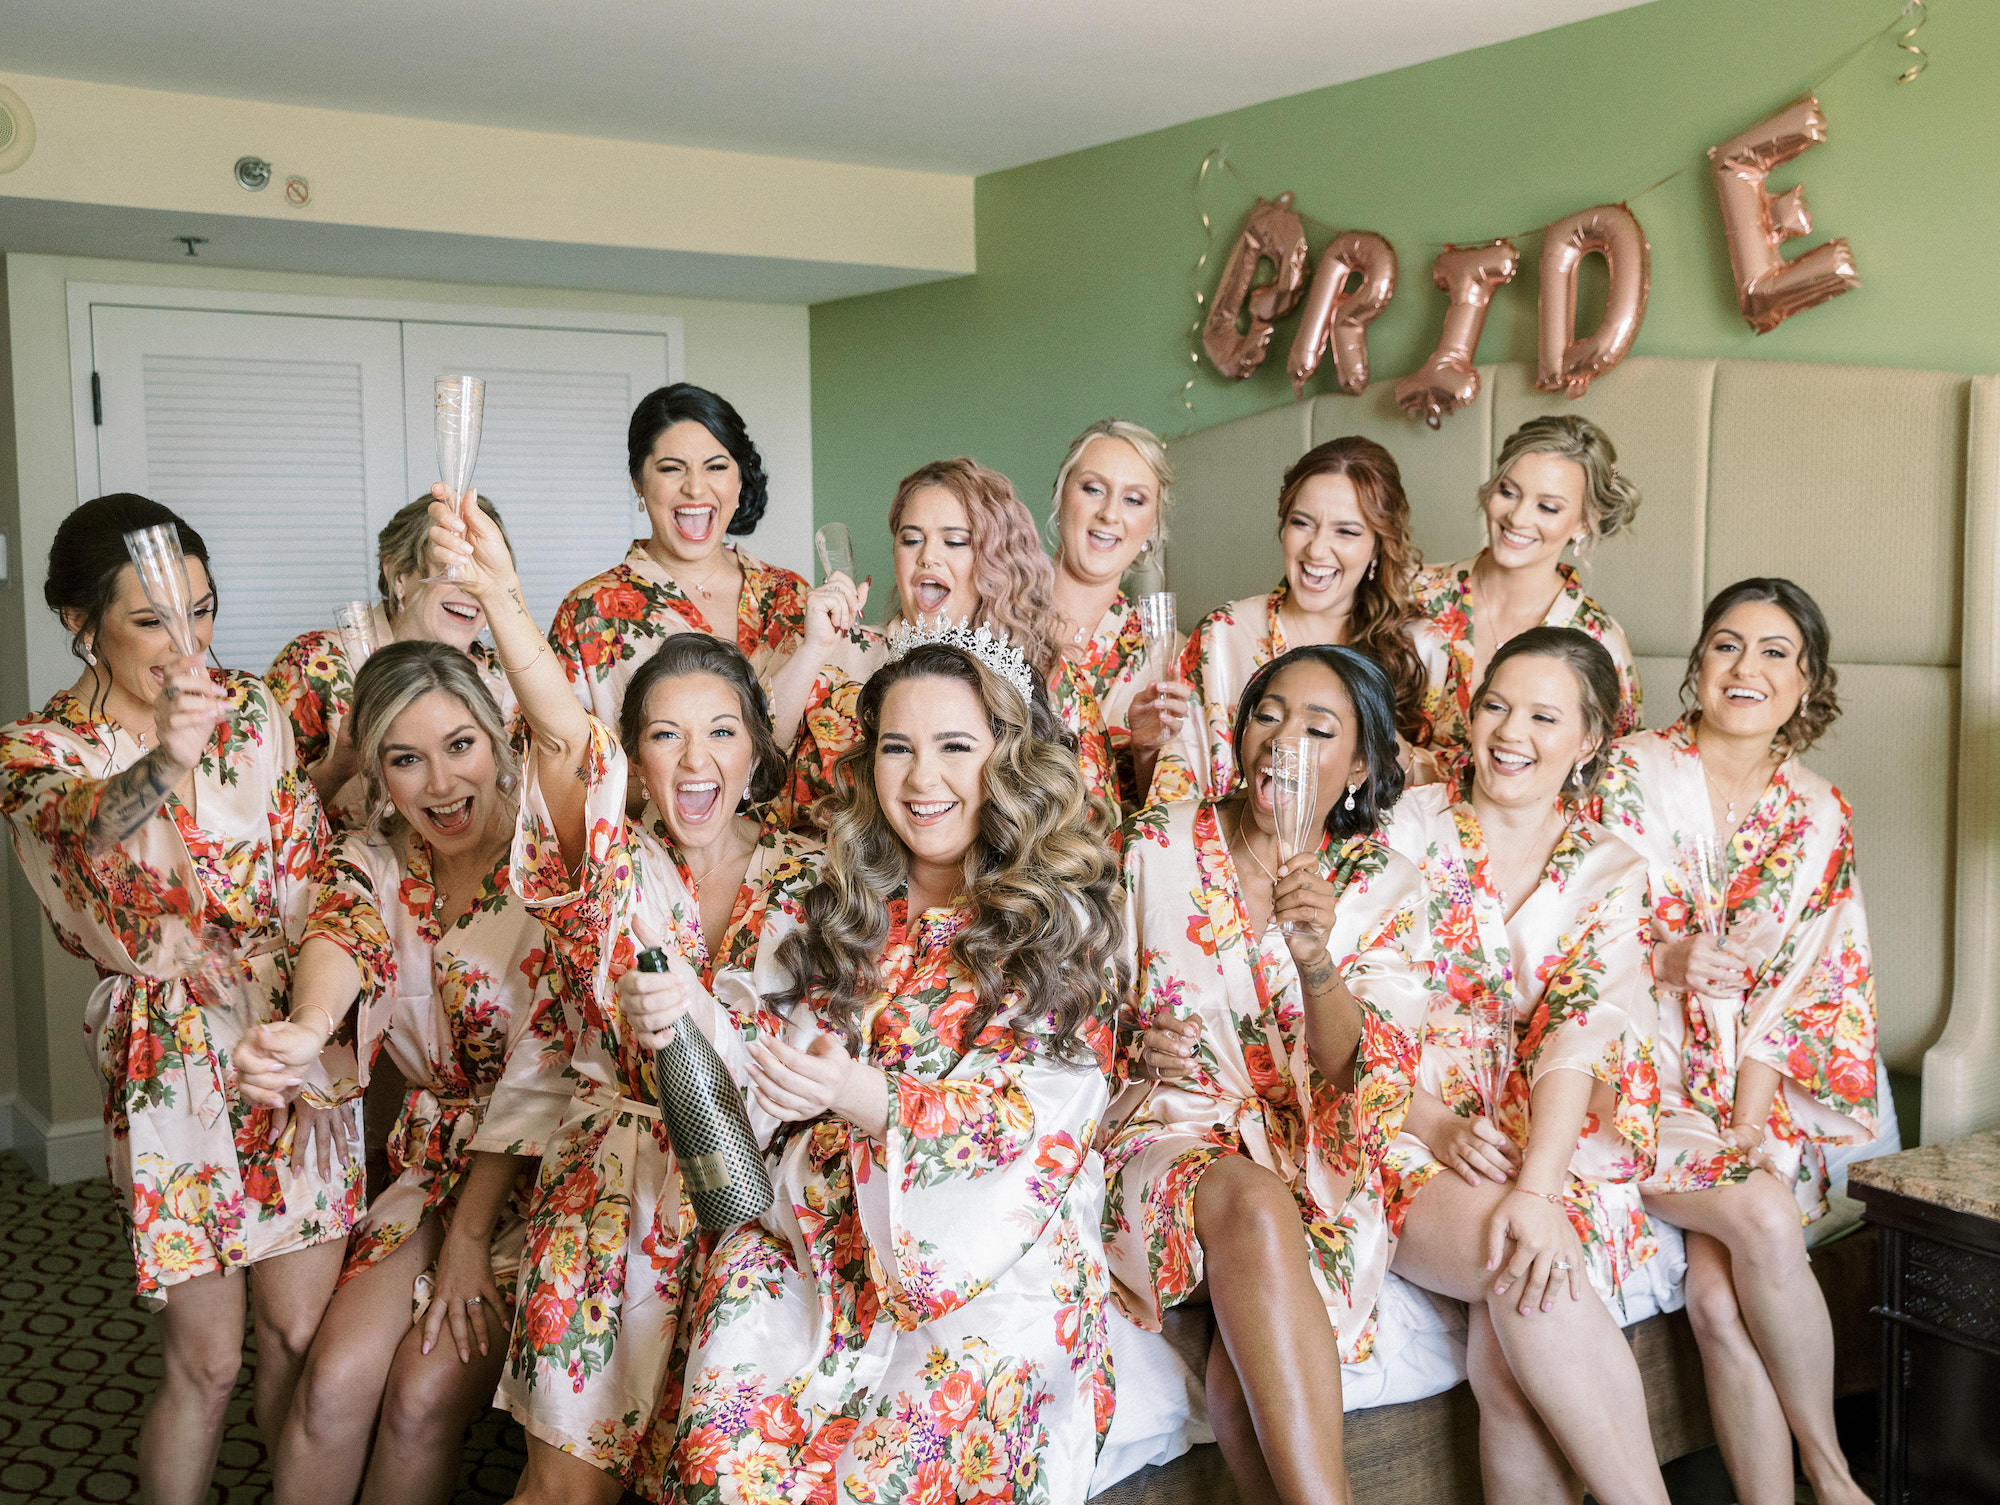 Royal Glam Gatsby Wedding, Bridal Party Getting Wedding Ready, Bridesmaids in Pink Floral Robes Popping Champagne with Bride in Princess Tiara | Tampa Bay Wedding Hair and Makeup Femme Akoi Beauty Studio